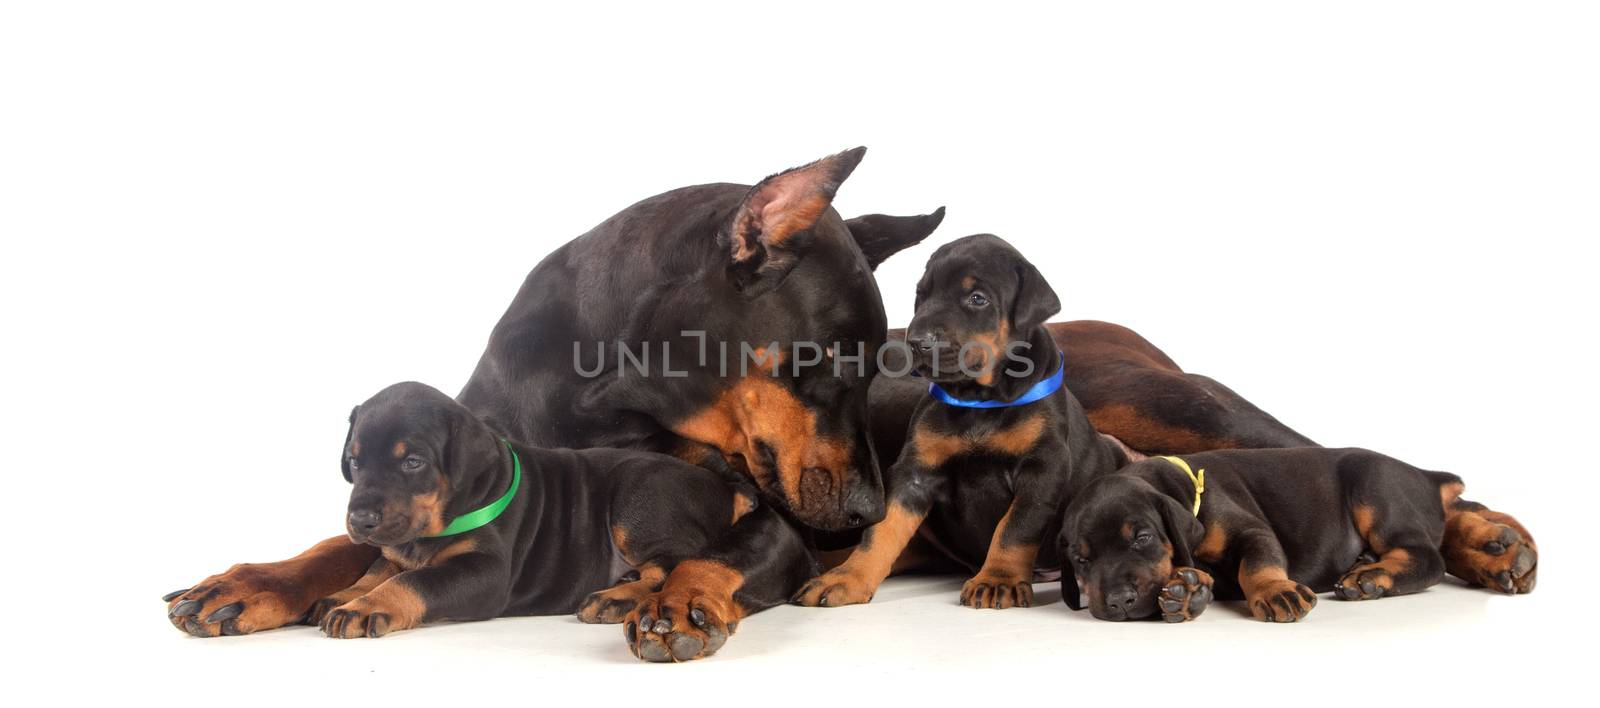 Doberman dog with puppies by gsdonlin